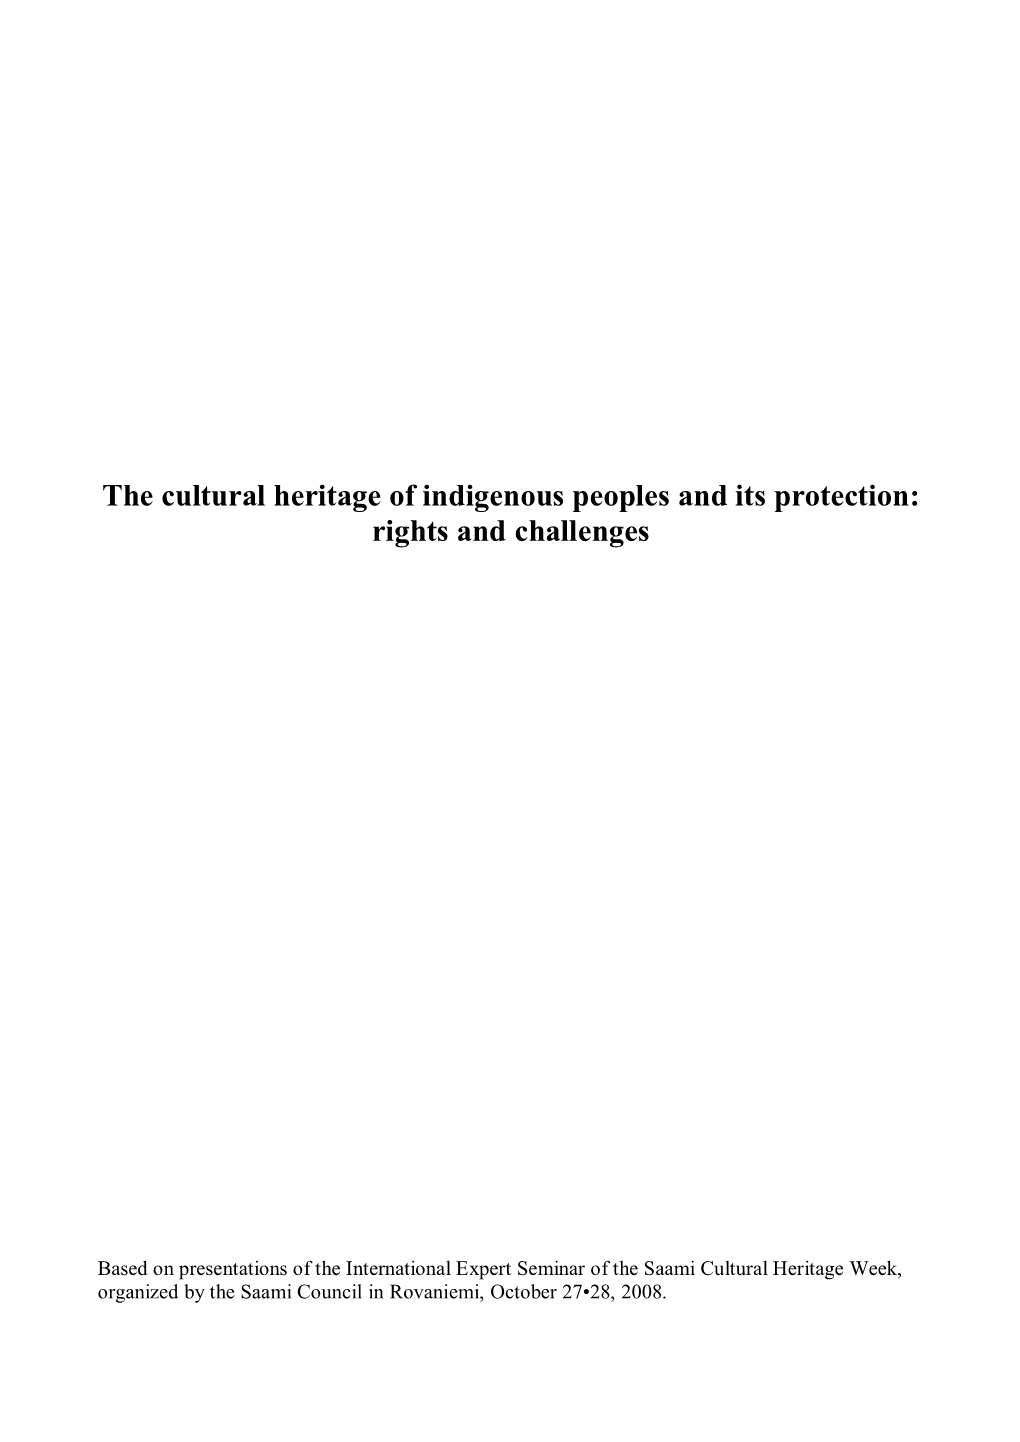 The Cultural Heritage of Indigenous Peoples and Its Protection: Rights and Challenges